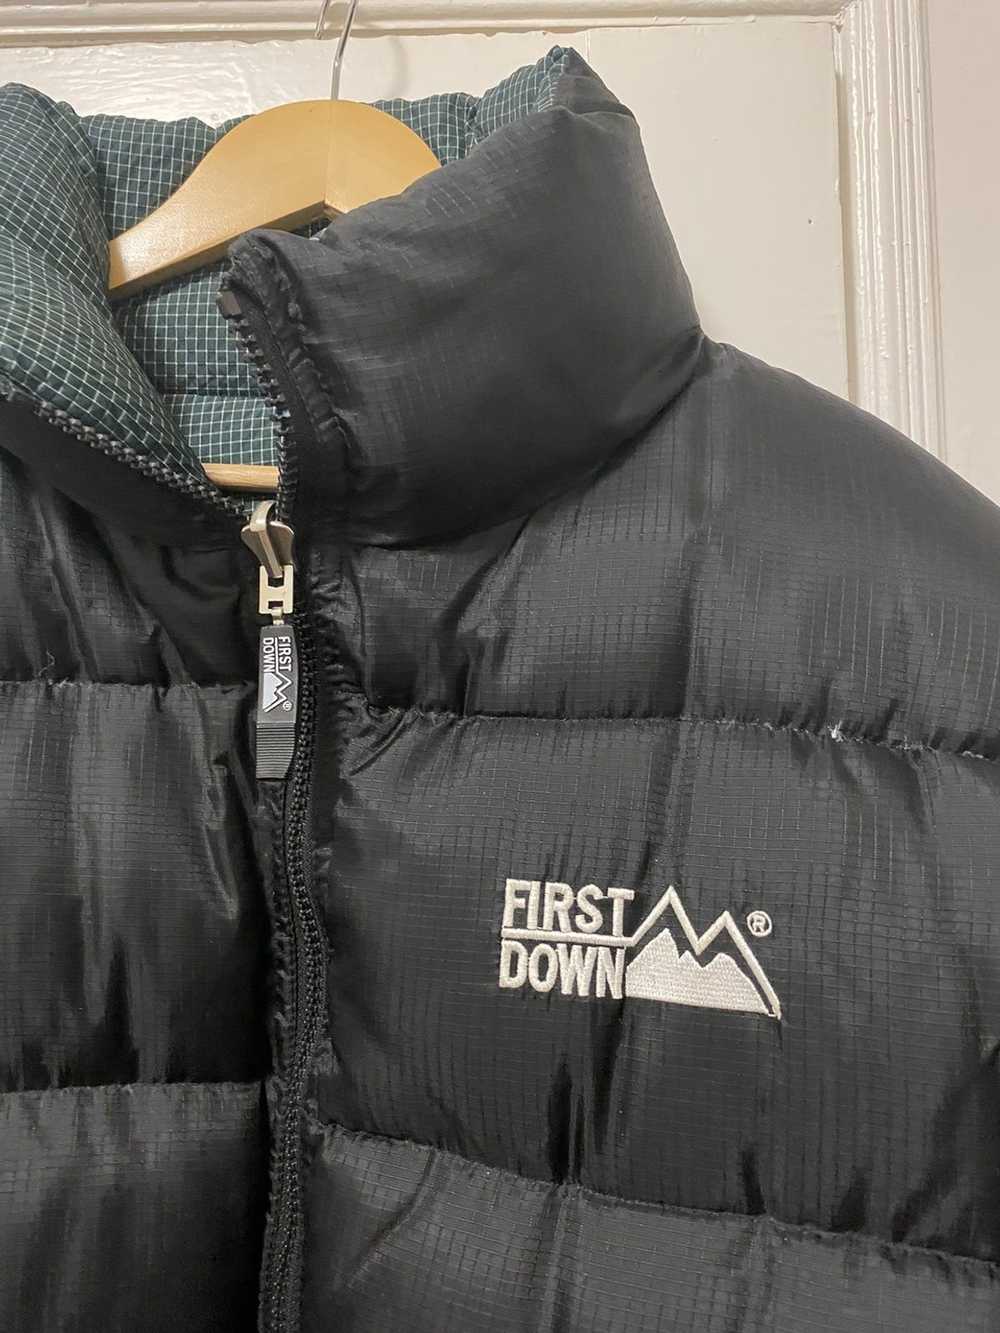 Japanese Brand First Down Reversible Parka - image 2